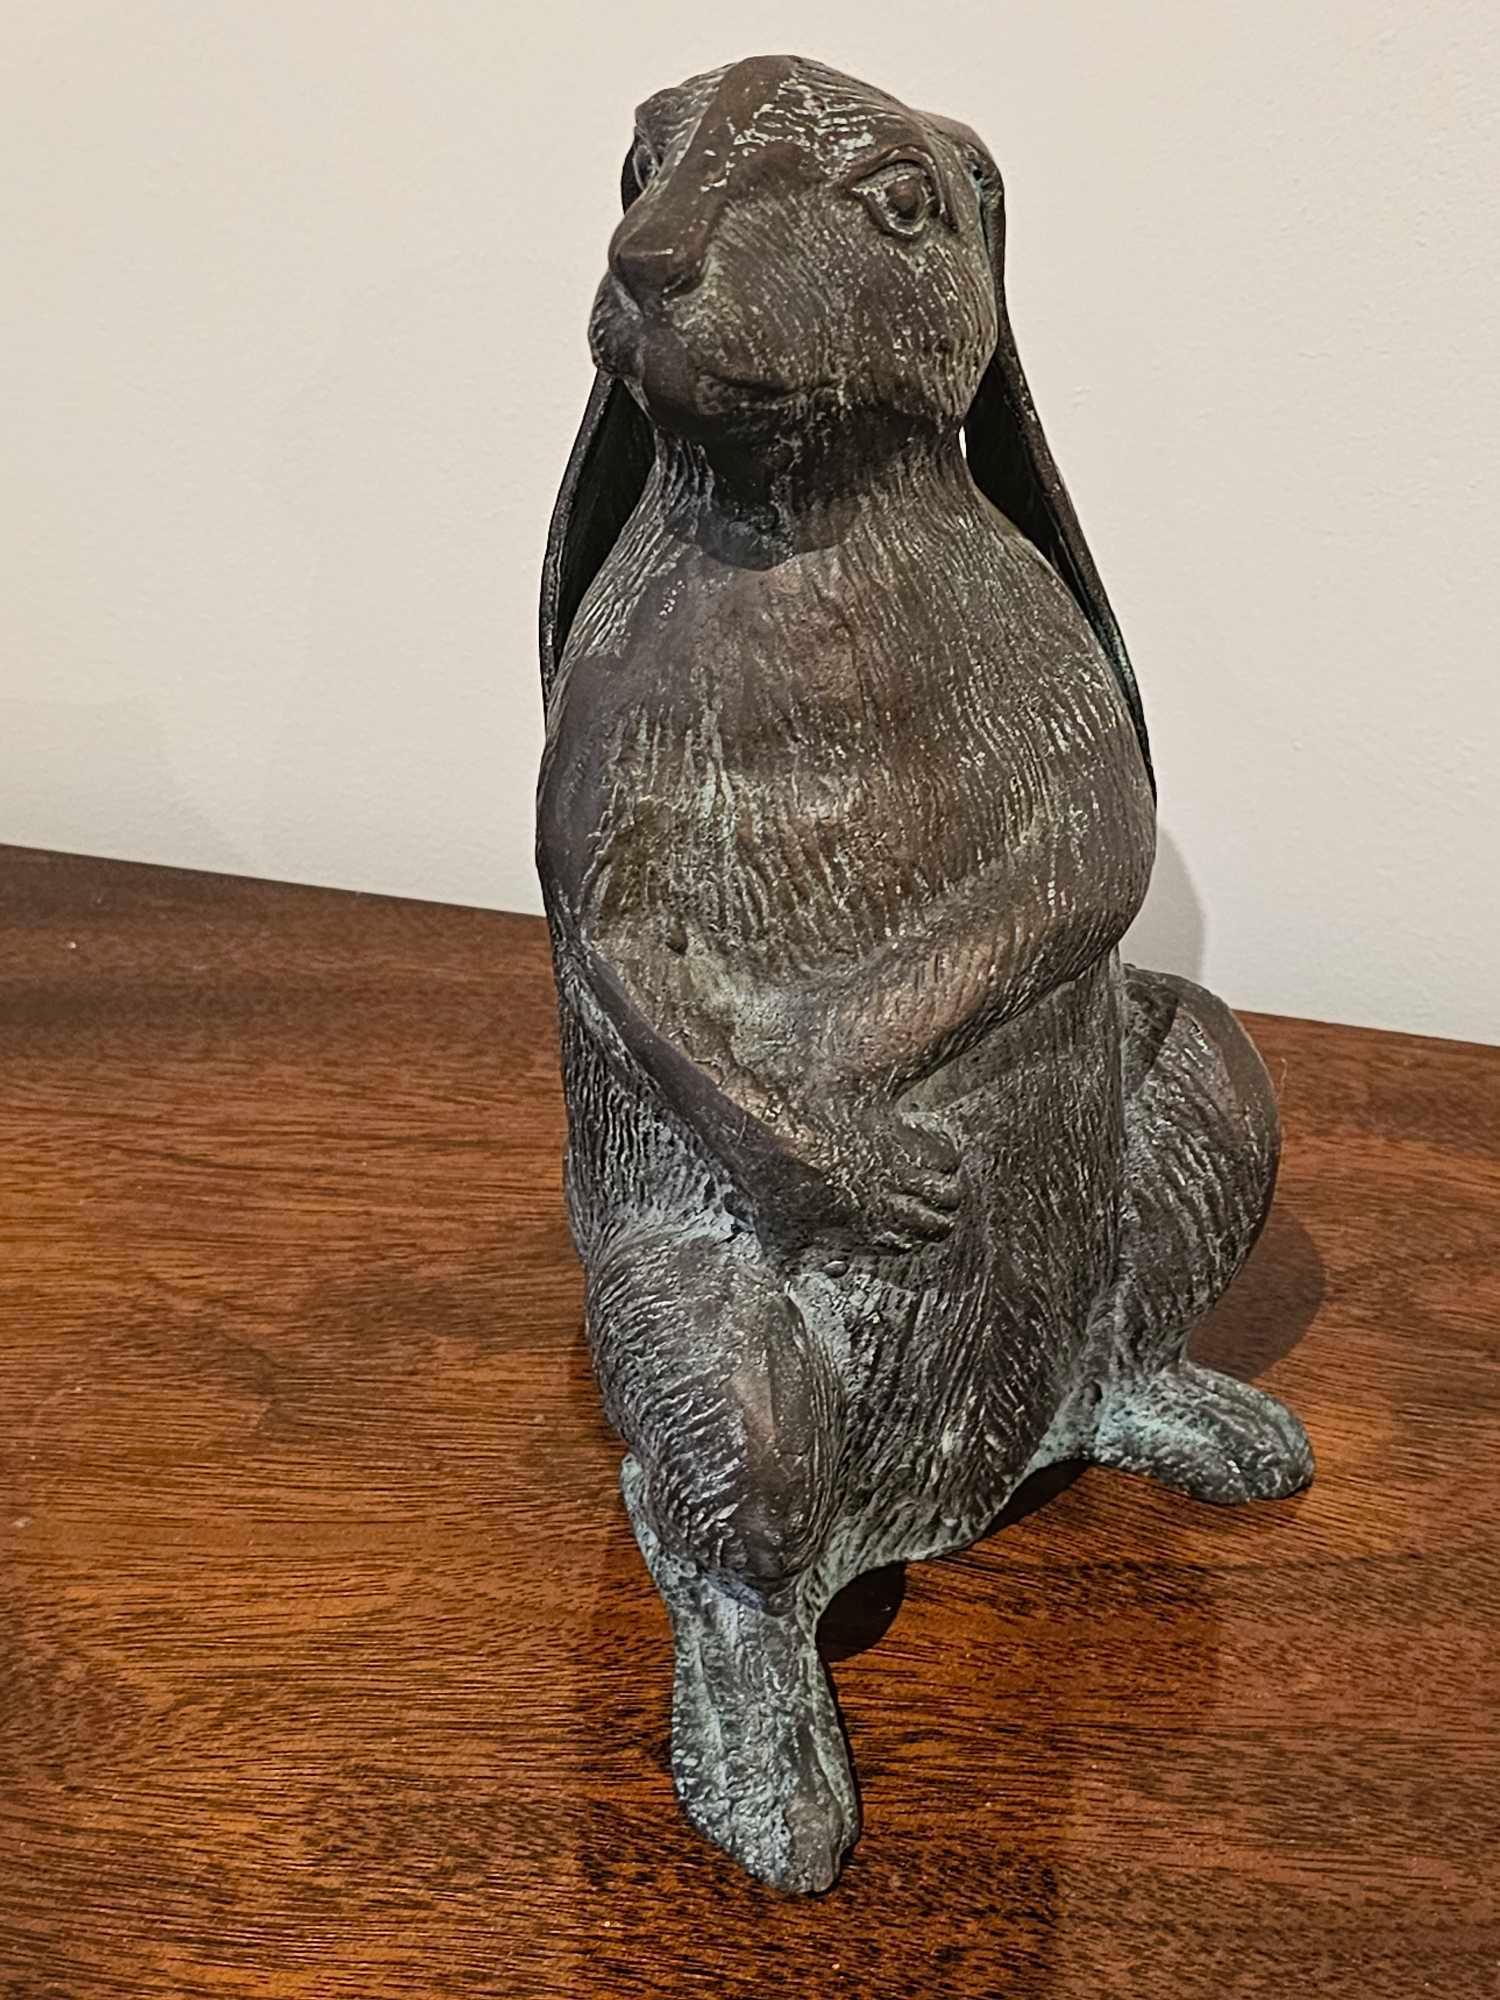 A Hollow Cast Figurine Of A Hare 27cm High - Image 3 of 3